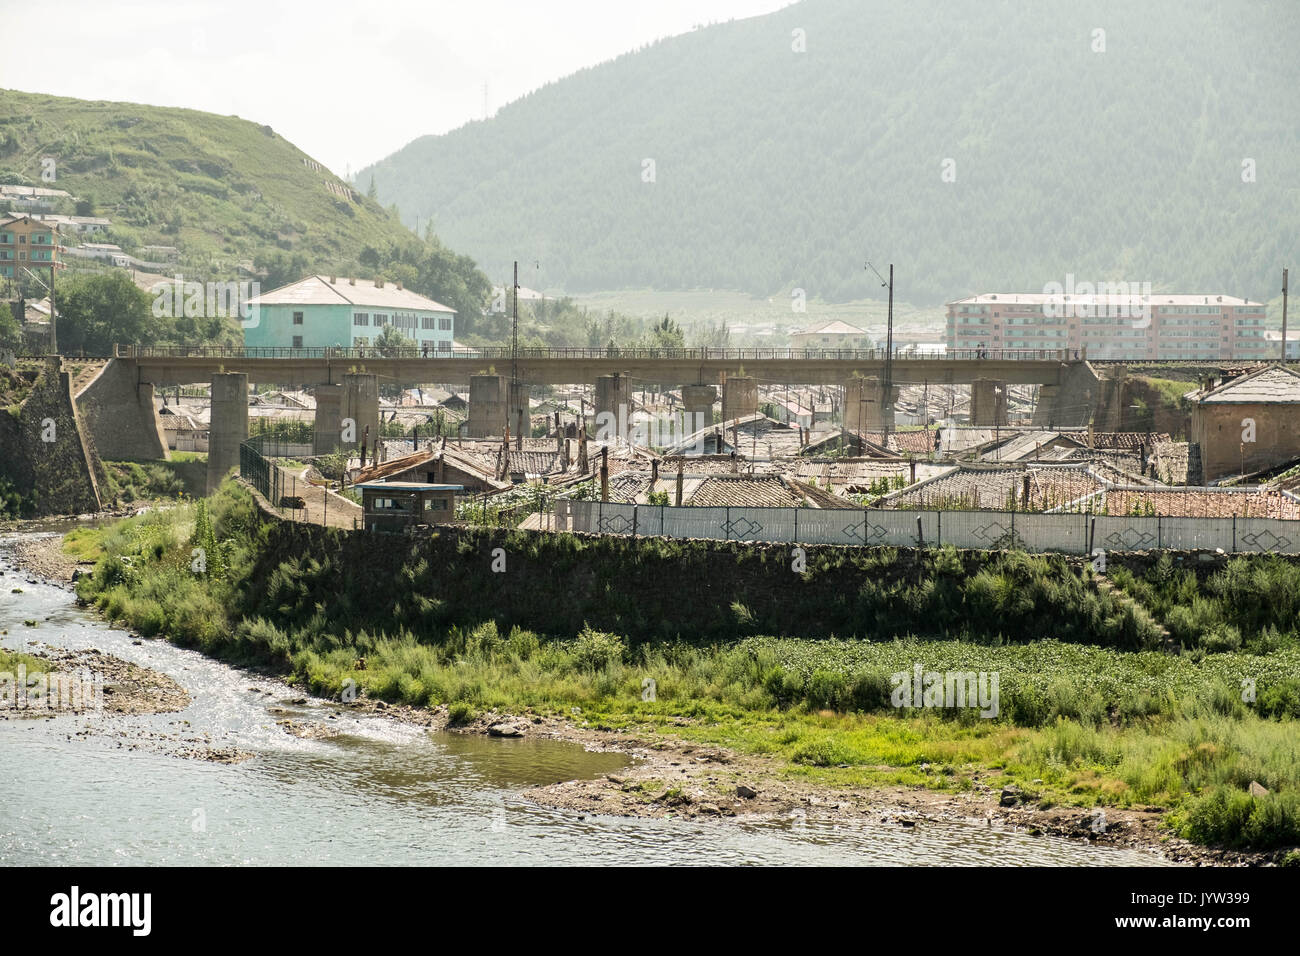 Hyesan, Ryanggang province, North Korea – August 5, 2017: The city has a population of approximately 200.000 and is set on the bank of the Yalu river. Stock Photo